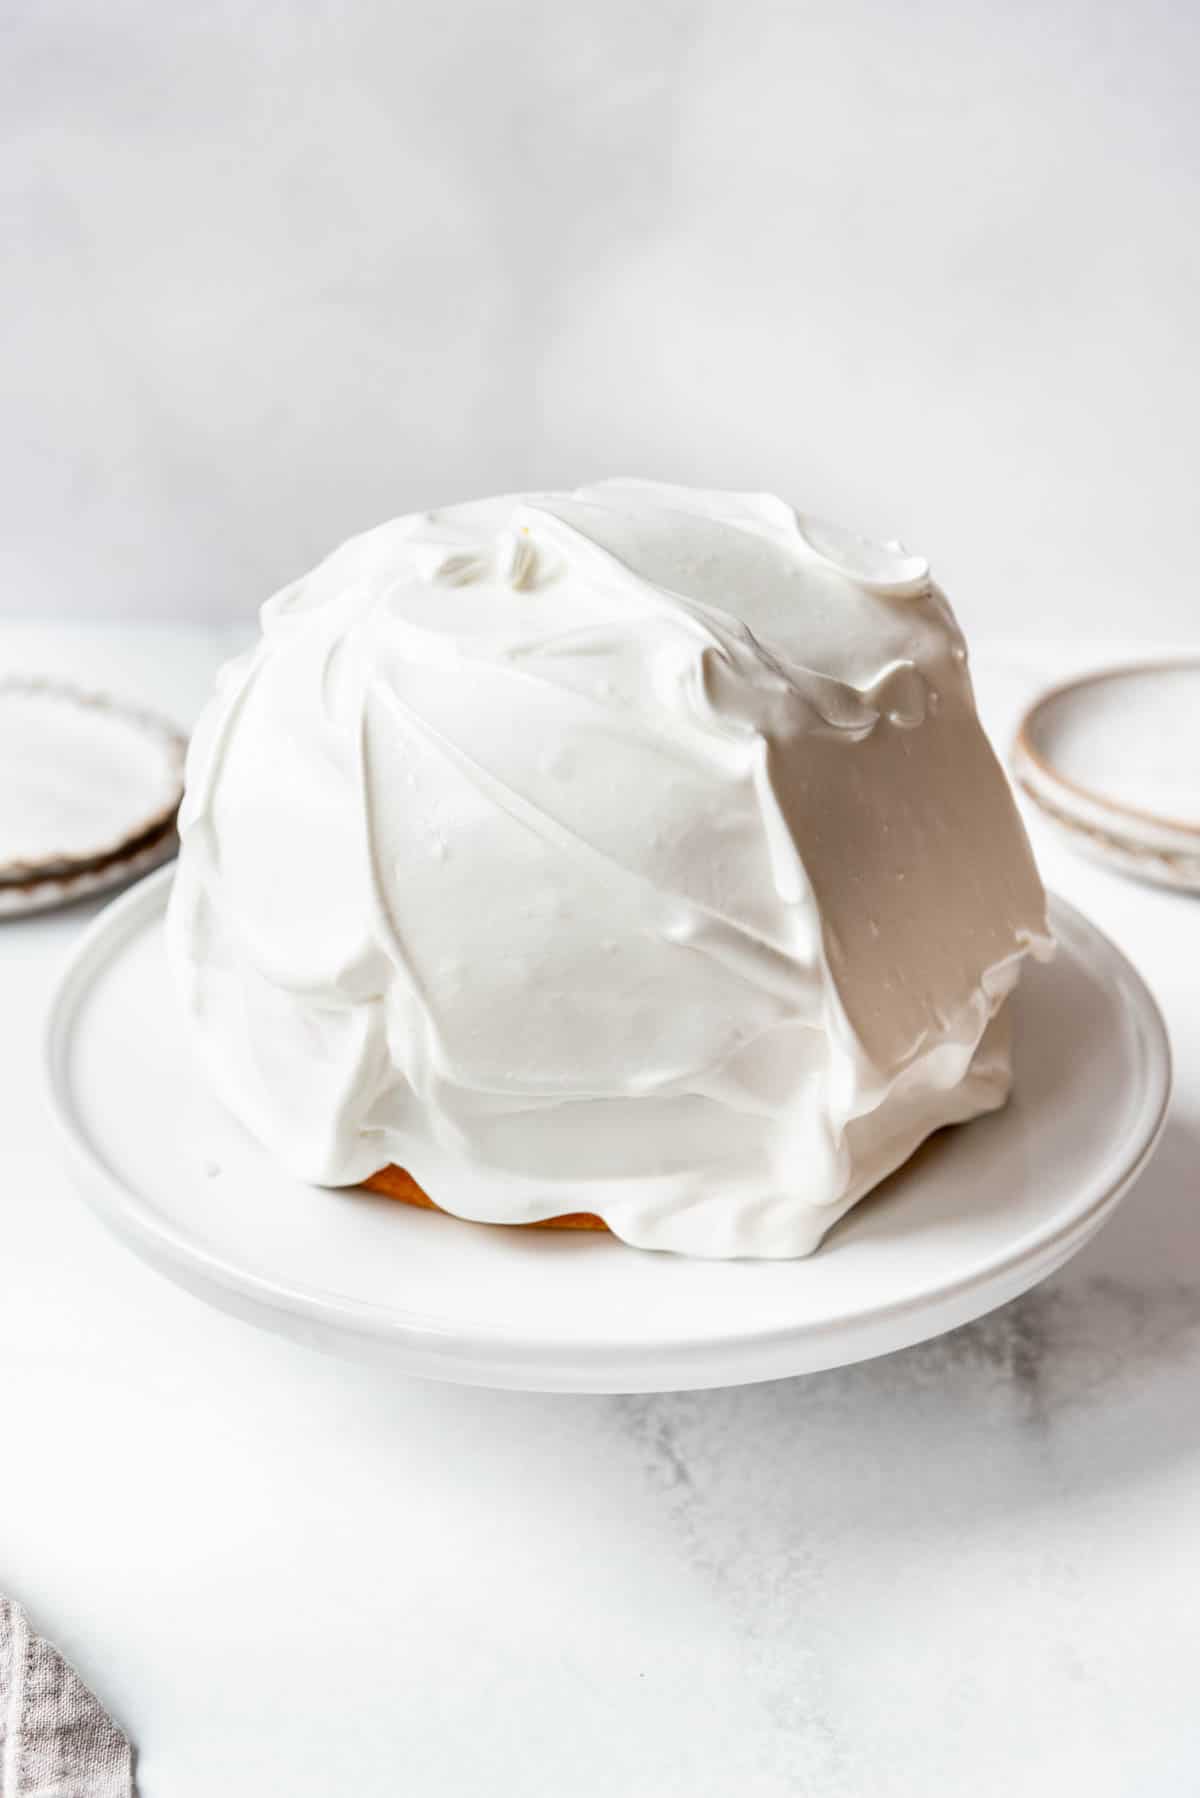 A baked Alaska covered in meringue before being toasted.